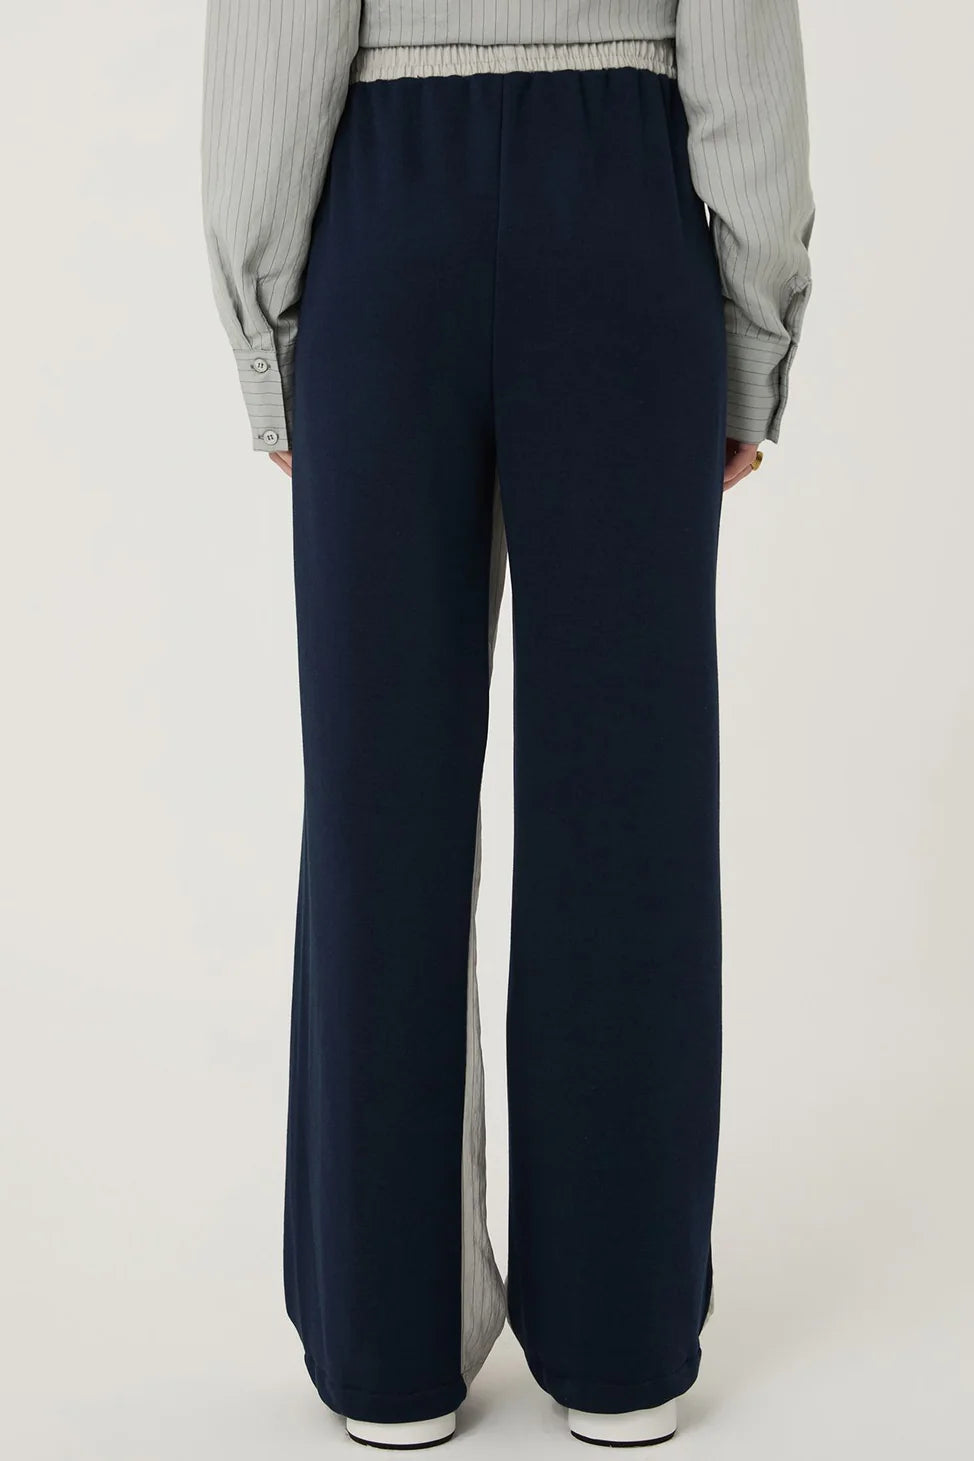 Match Detailed Elastic Waist Trousers Gray